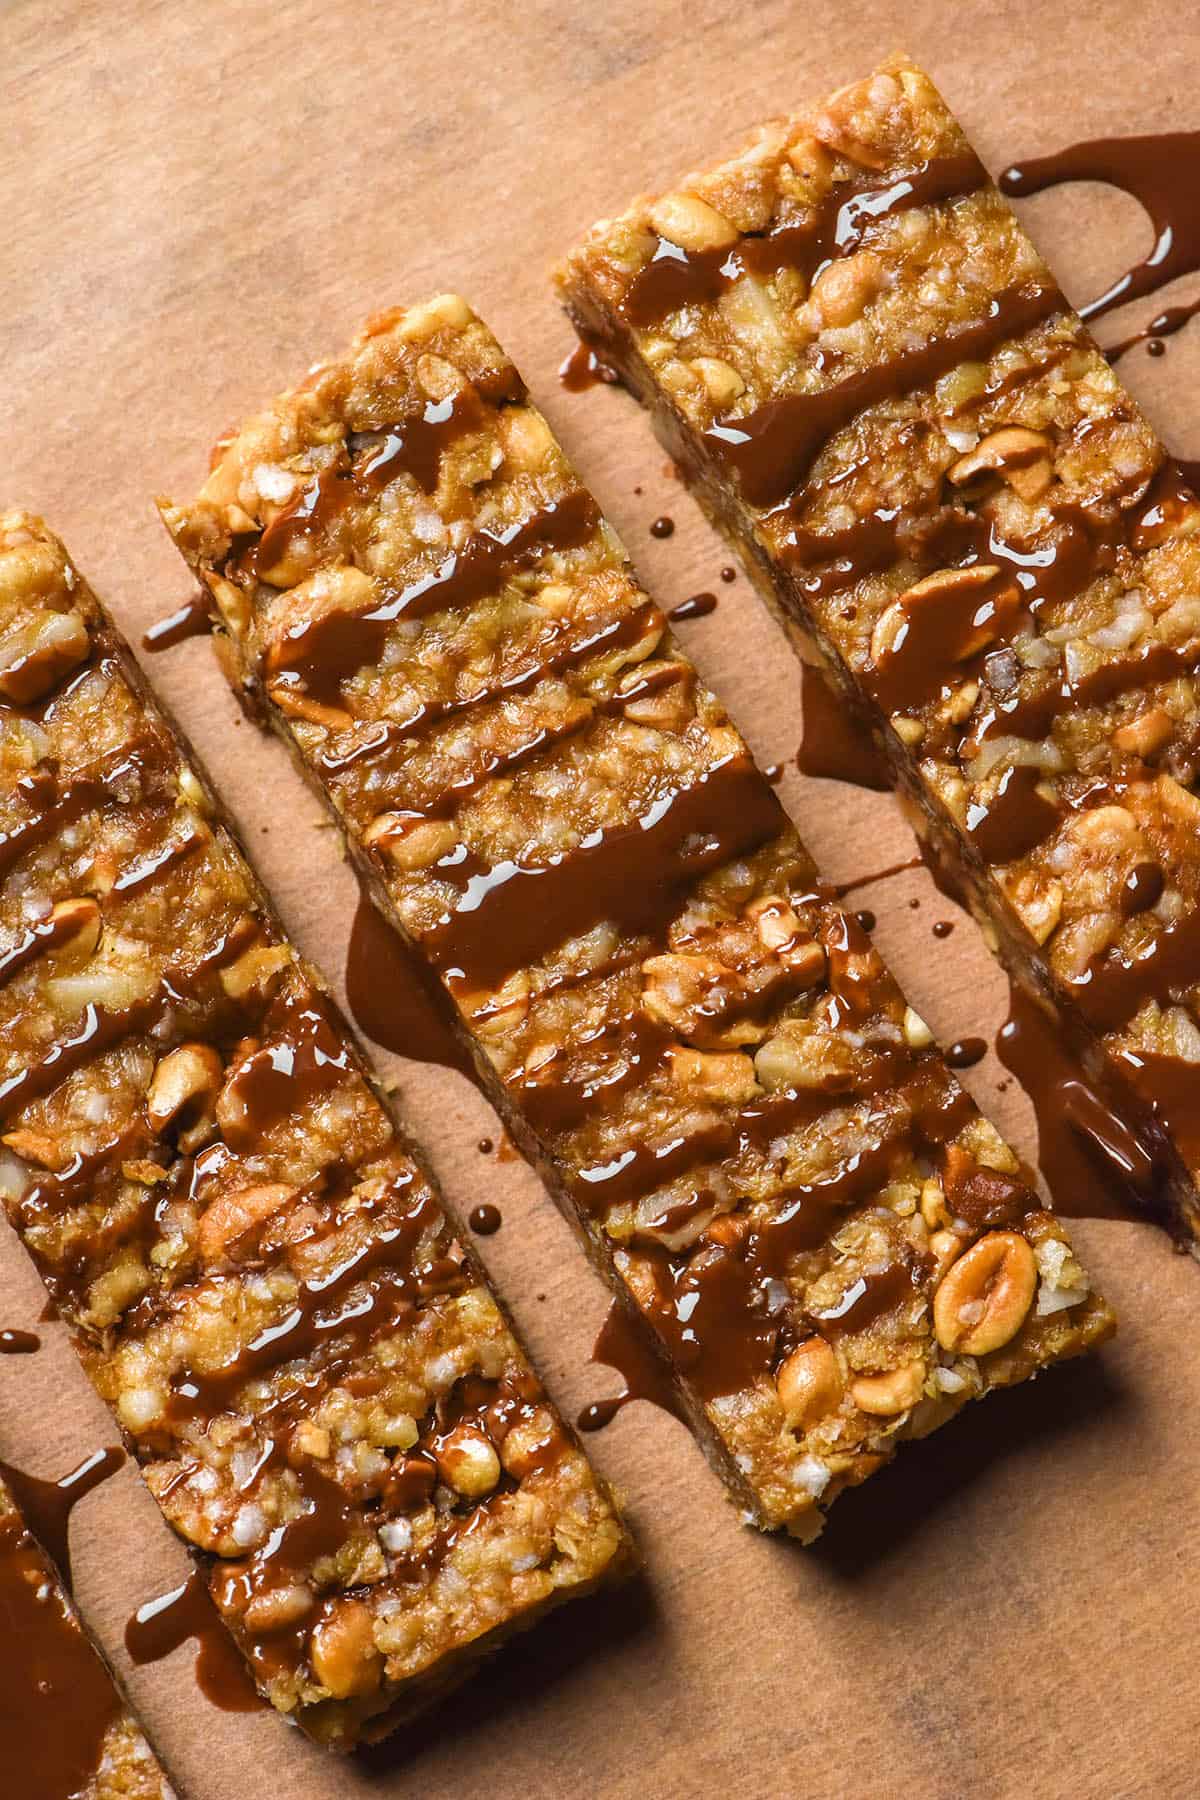 An aerial image of Low FODMAP granola bars being drizzled with dark chocolate. The bars side evenly spaced on a sheet of light brown baking paper.